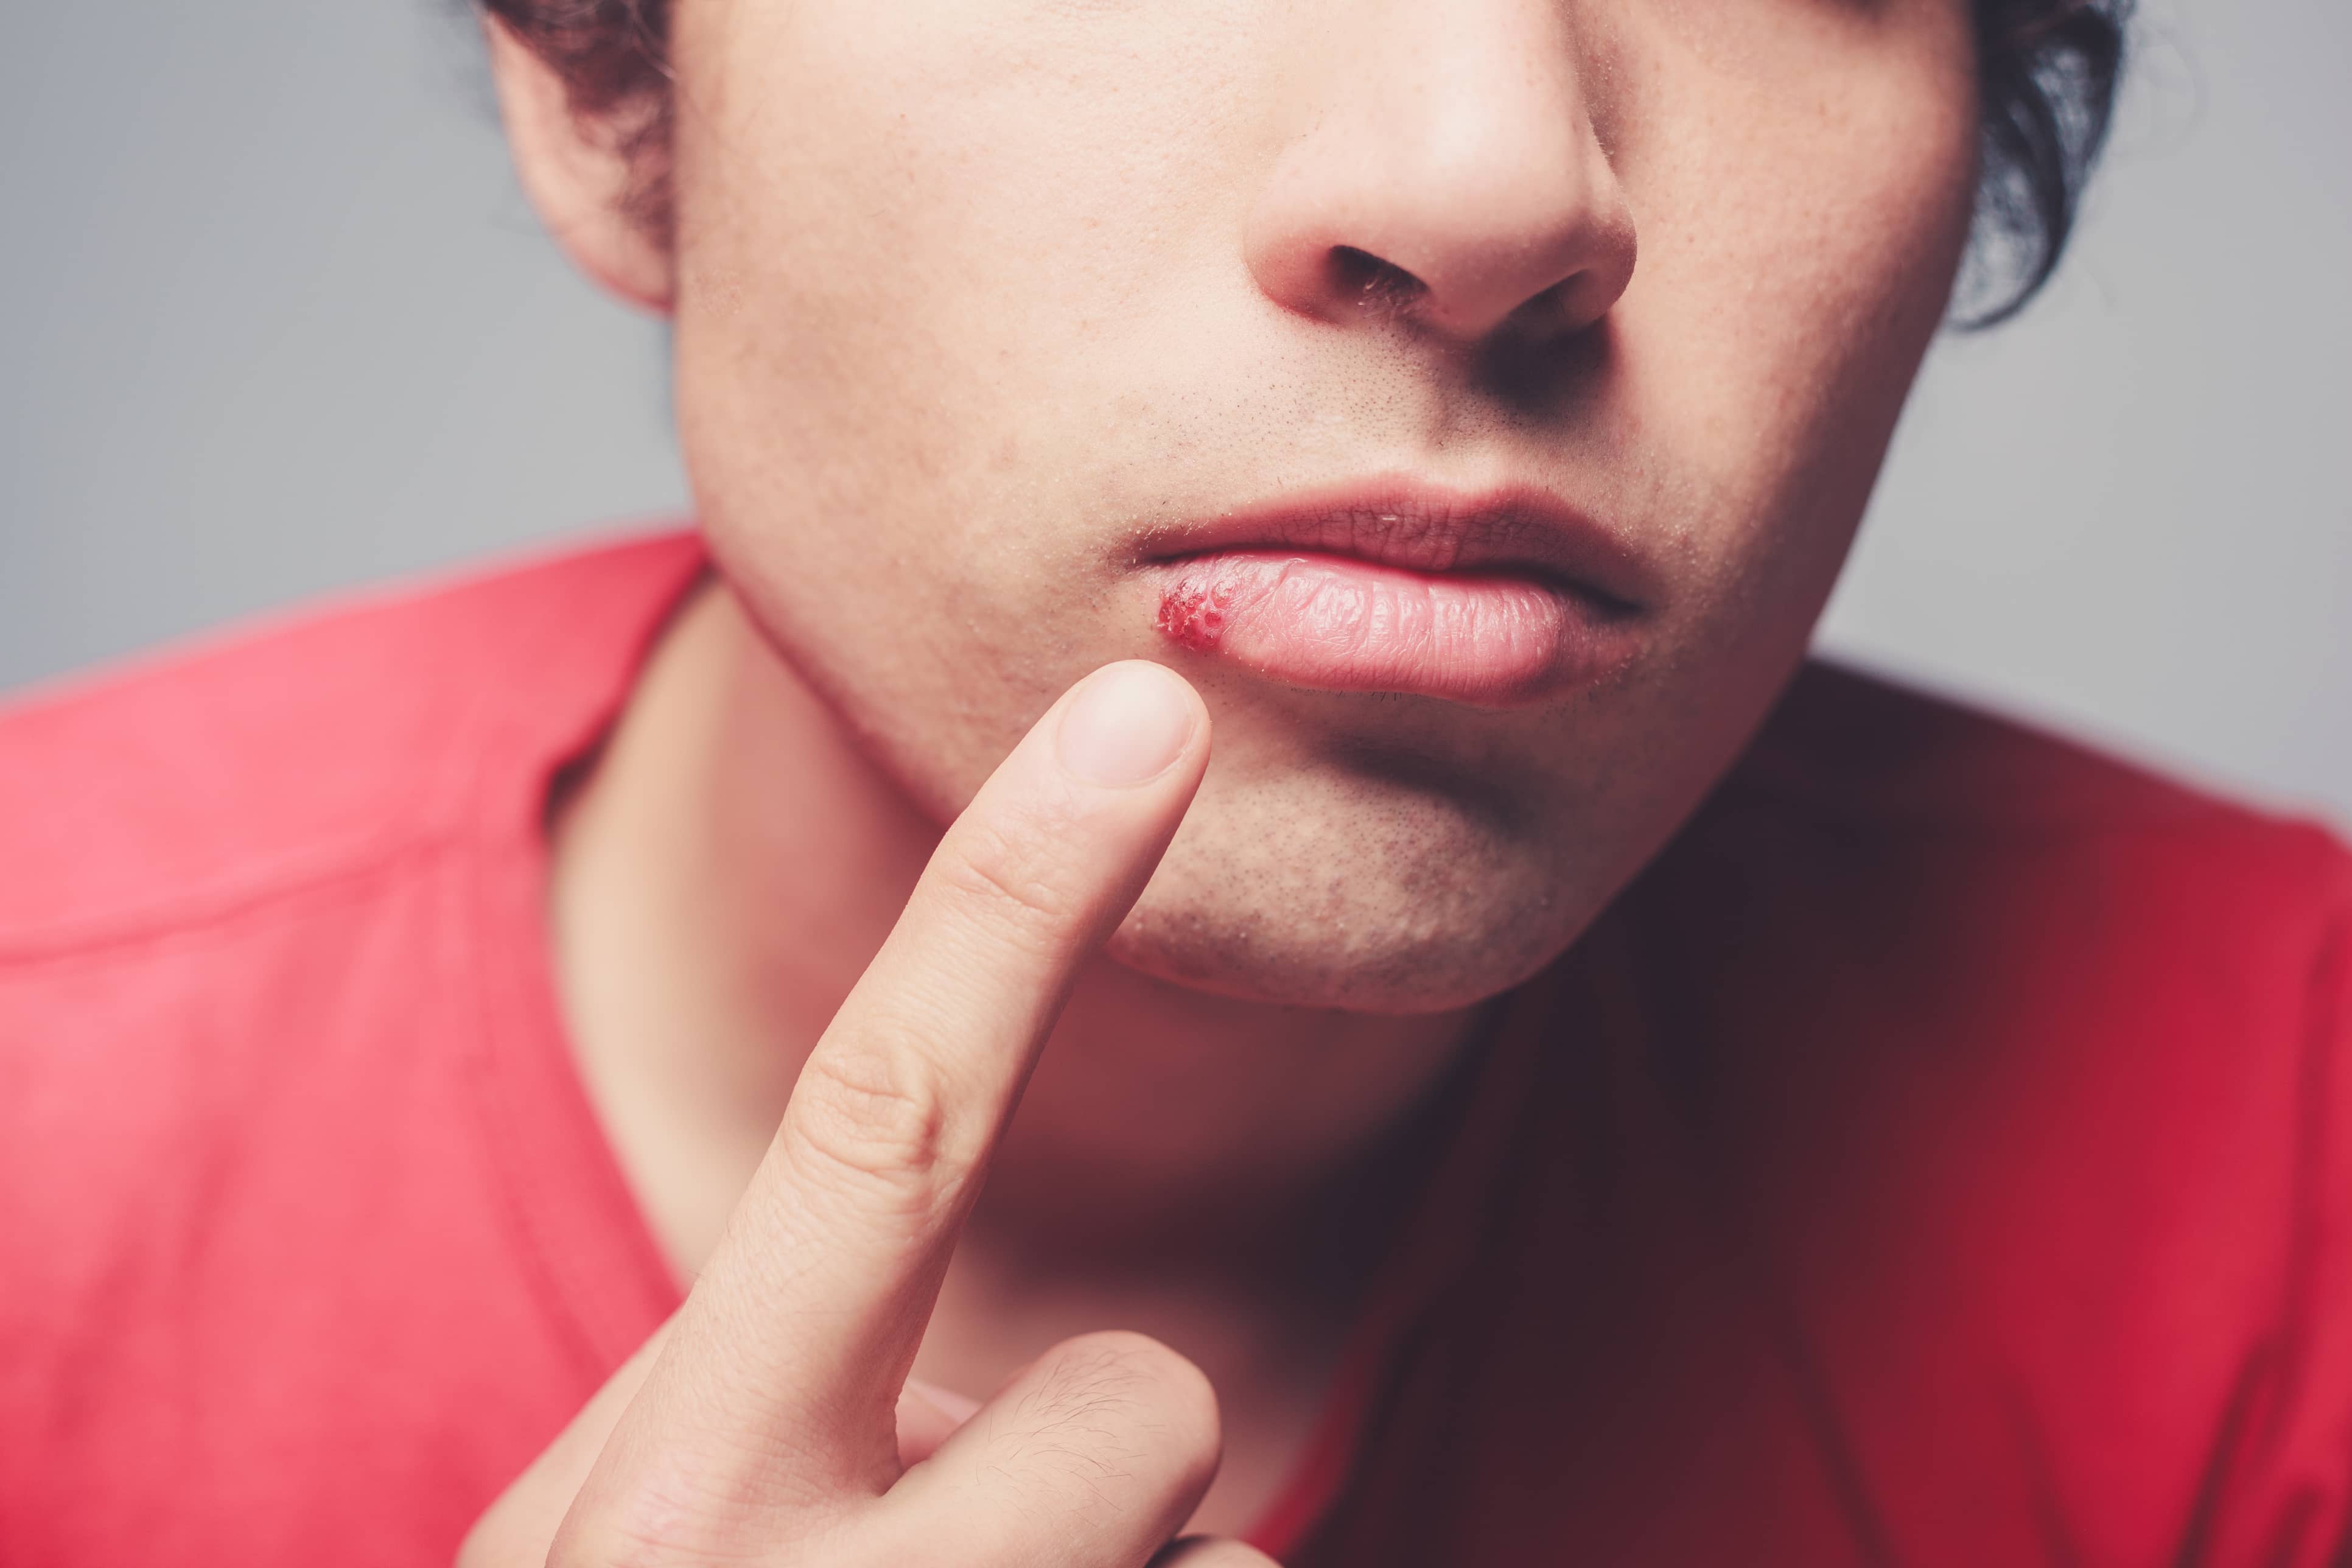 How to Stop a Cold Sore in its Early Stages